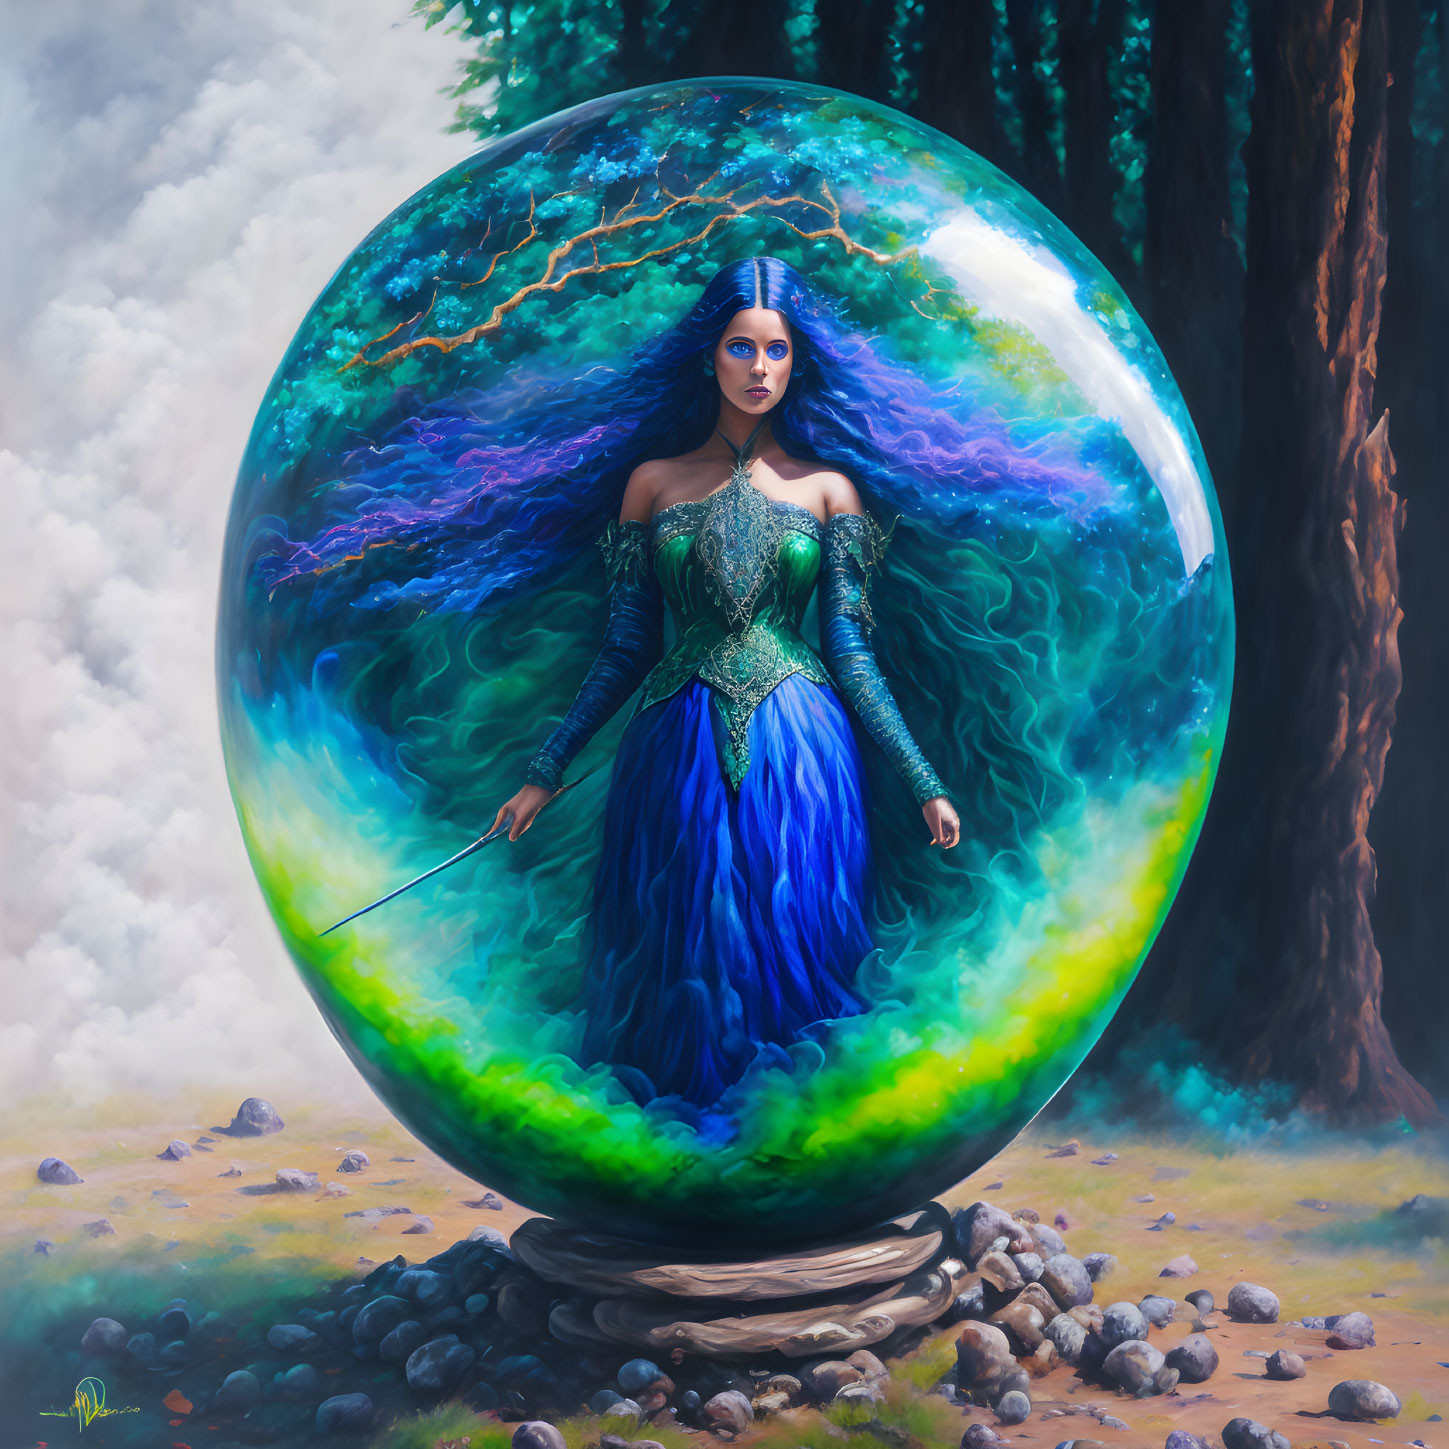 Fantasy Artwork: Woman with Blue Hair in Green Corset Dress Wielding Sword in Magical Forest